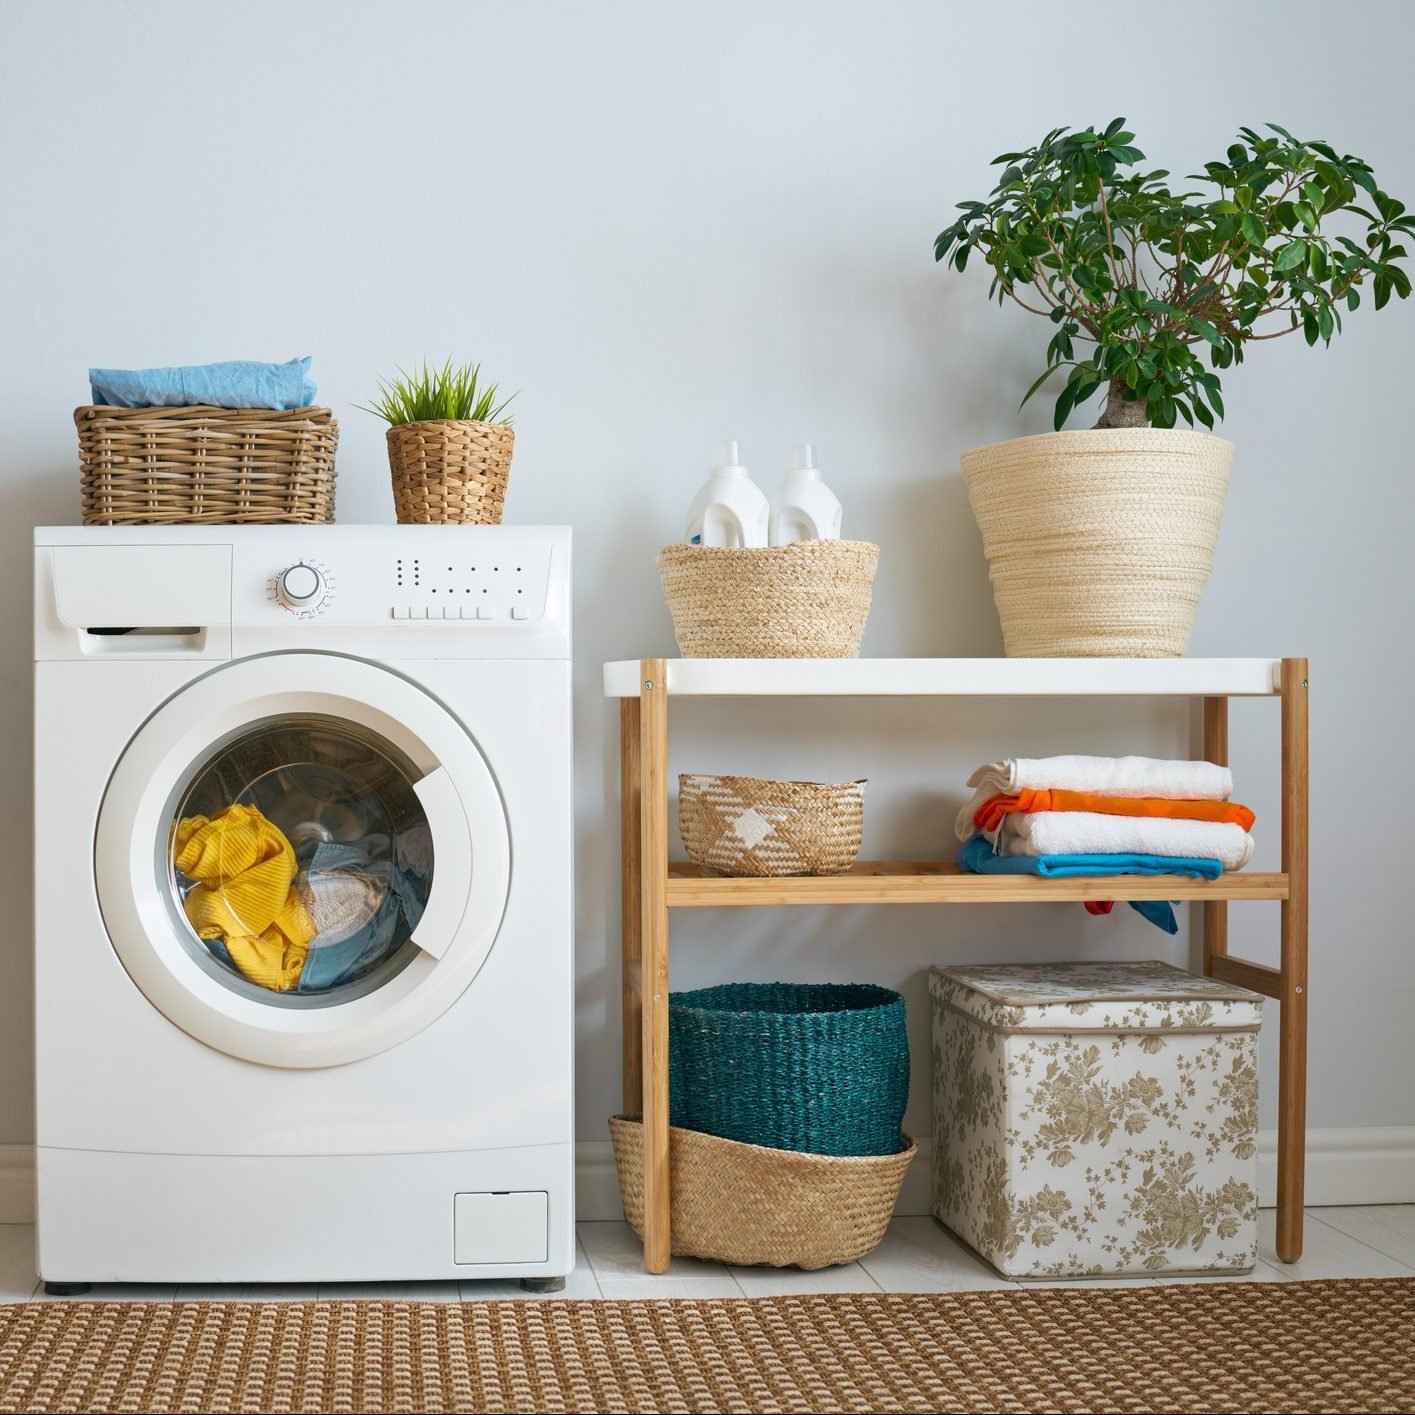 21 Top Rated Laundry Products on Amazon